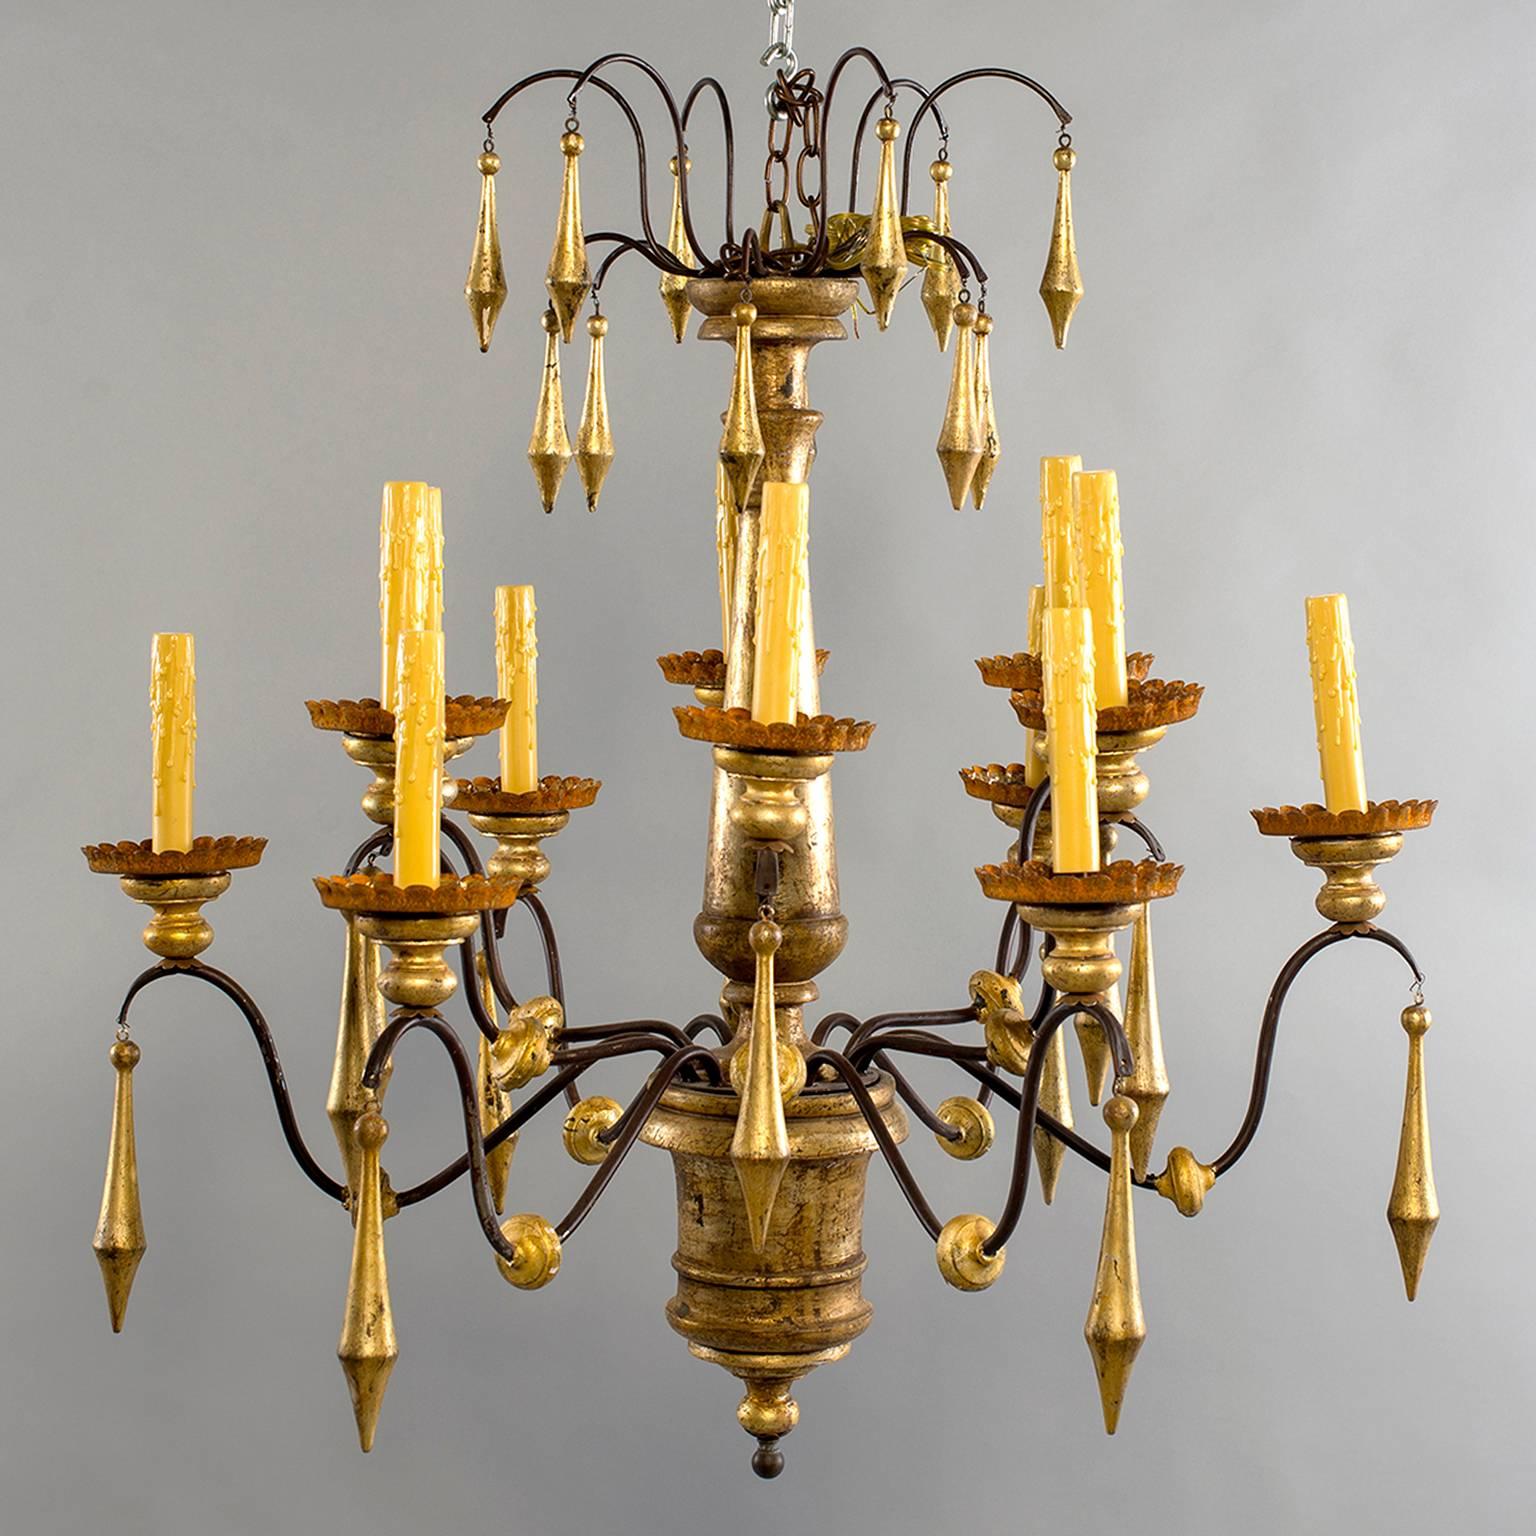 Large Italian gilded wood and iron chandelier with 12 candle style lights and two tiers of large dangling giltwood pendants.
# of Sockets: 12
Socket Type: Candelabra.